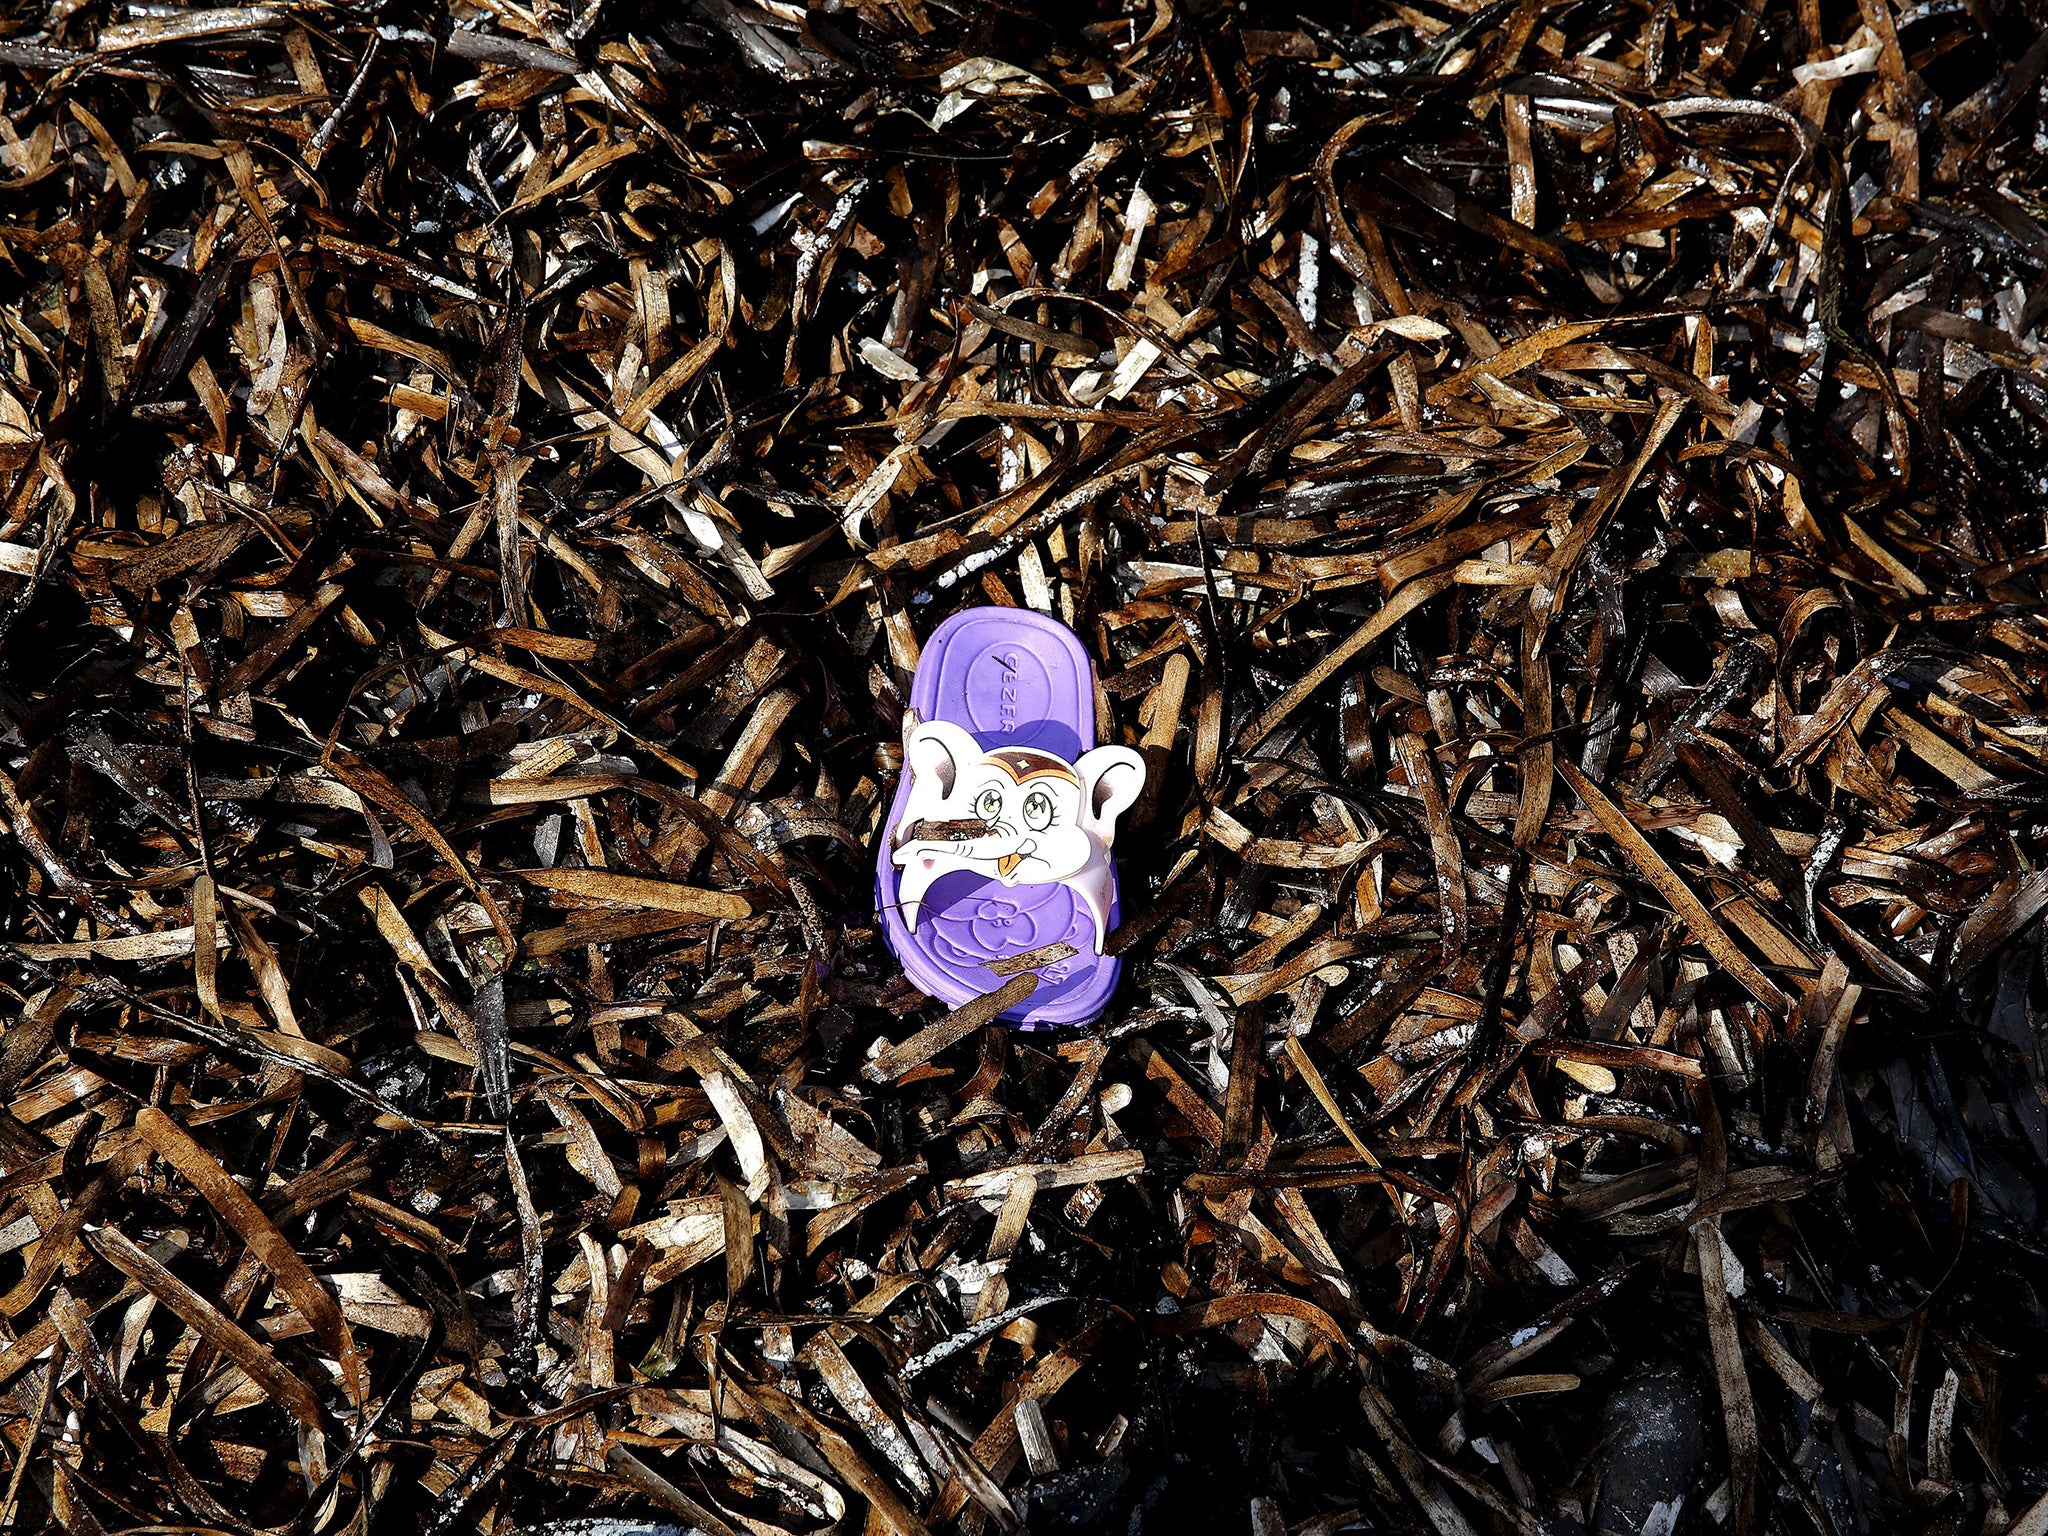 A lost flip-flop is a reminder of the desperate rush to shore on Lesbos